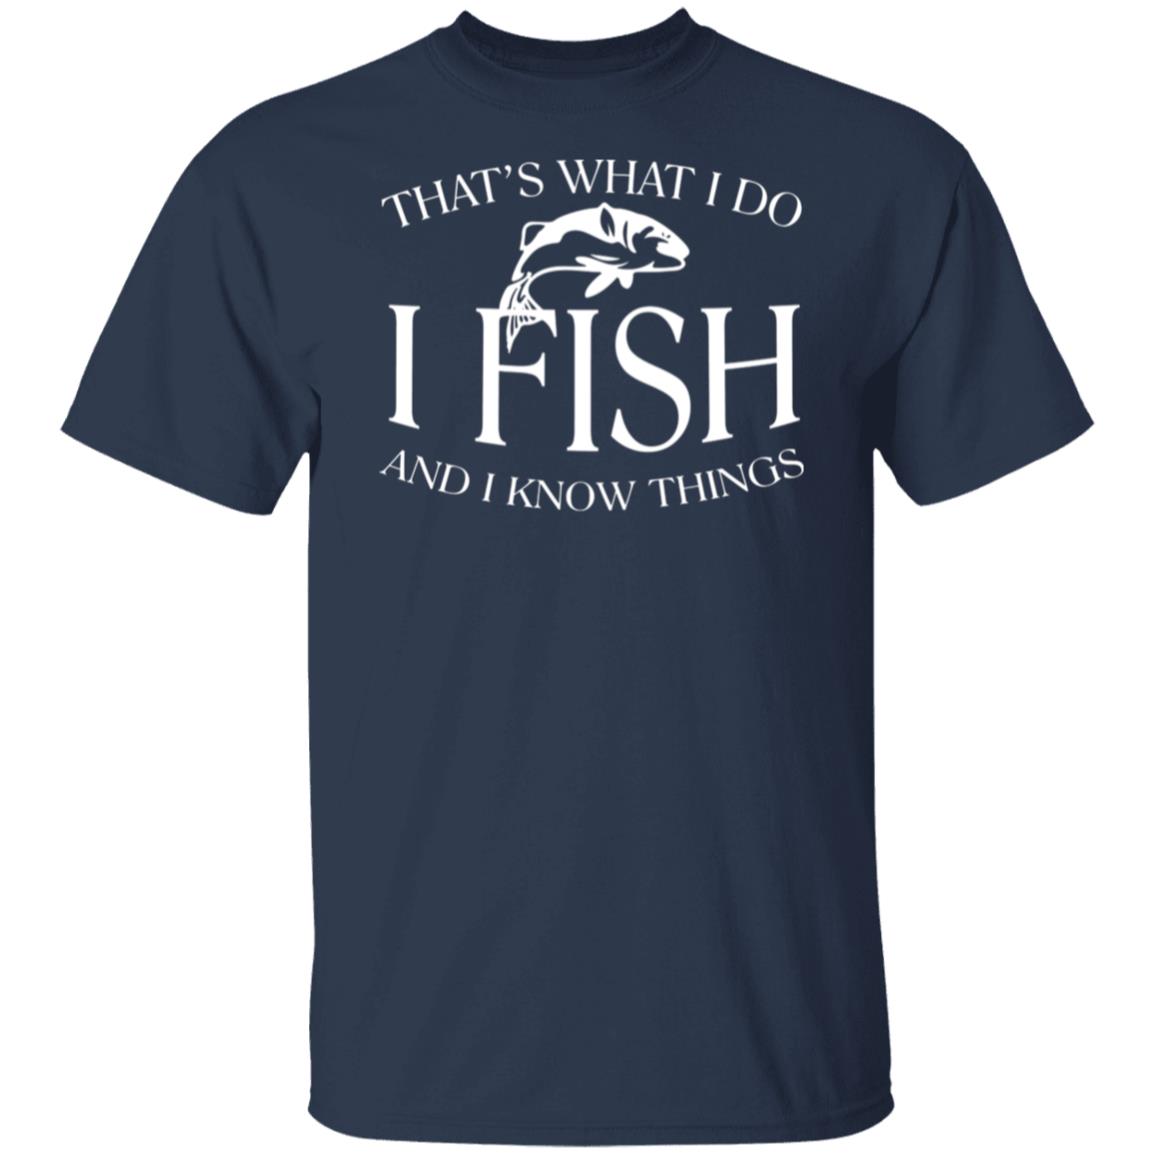 That's what I do I fish and I know things t-shirt navy